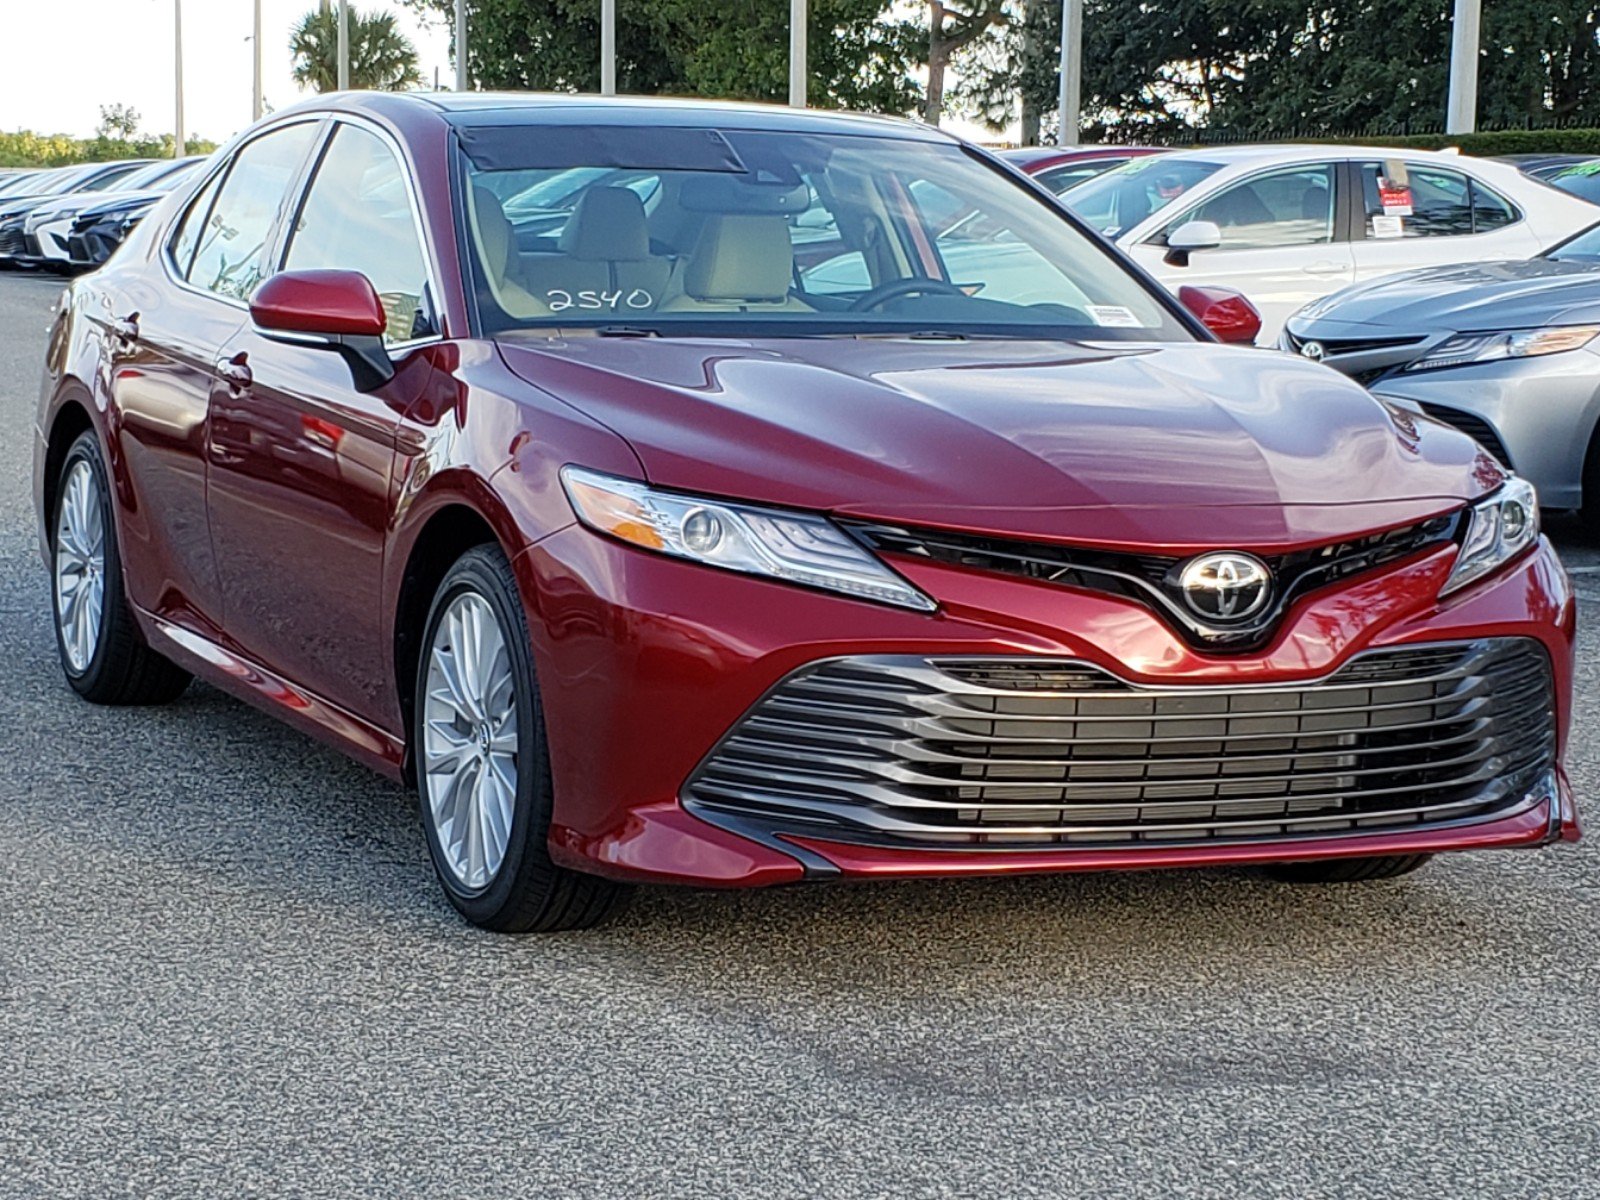 2019 Toyota Camry - Photos All Recommendation